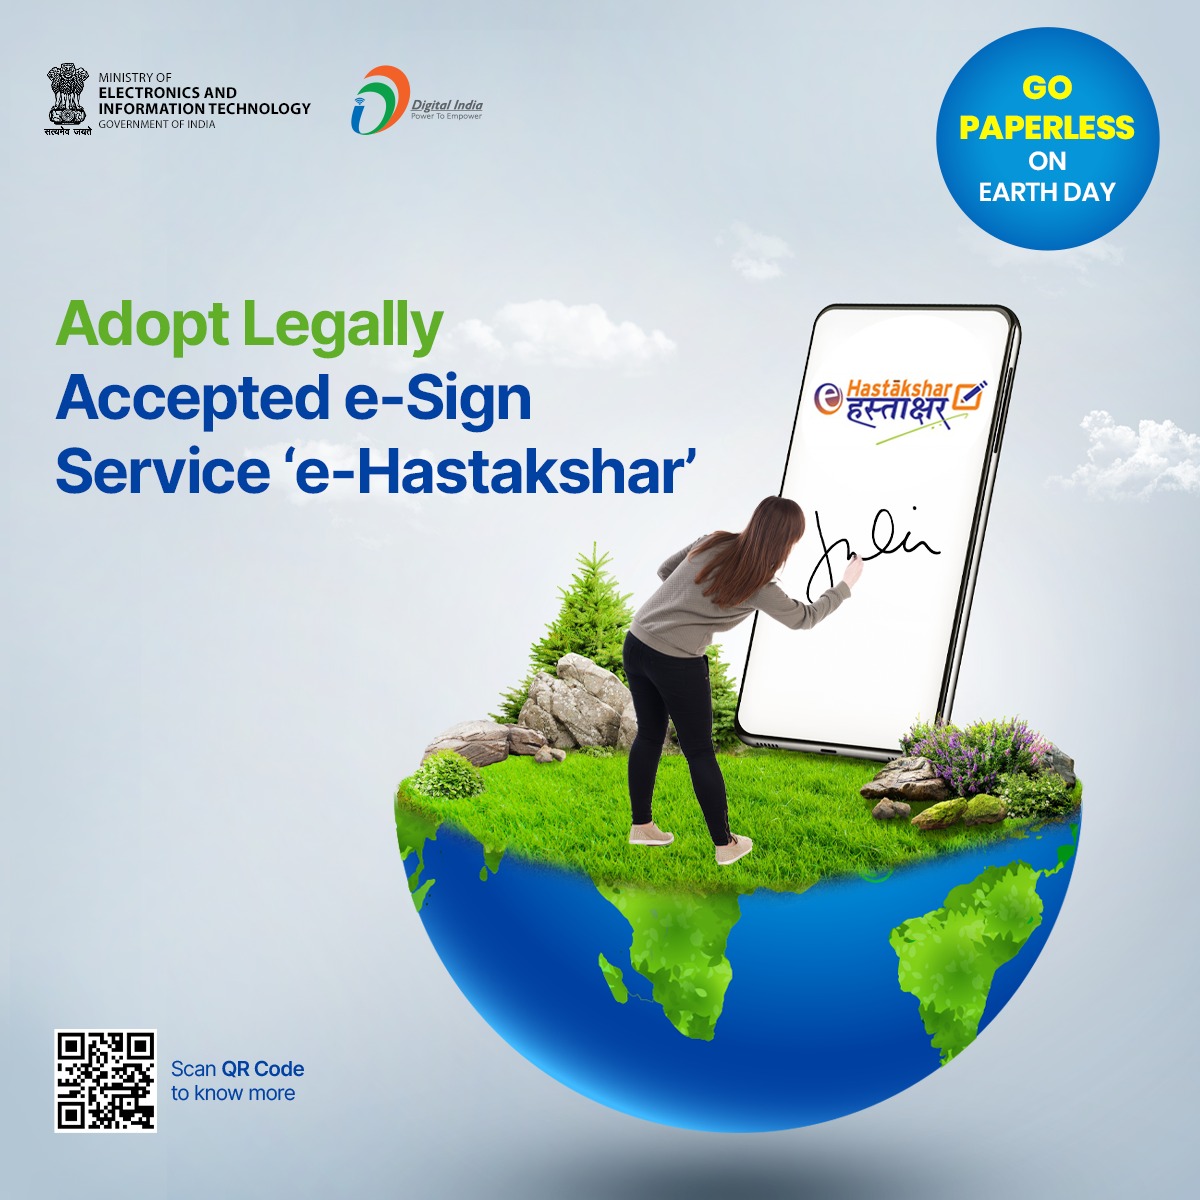 🌎 The eSign service 'e-Hastakshar' offers online service to citizens for instant signing of their documents securely in a legally acceptable form. Visit esign.cdac.in #DigitalIndia #GoPaperlessWithDigitalIndia #EarthDay @cdacindia